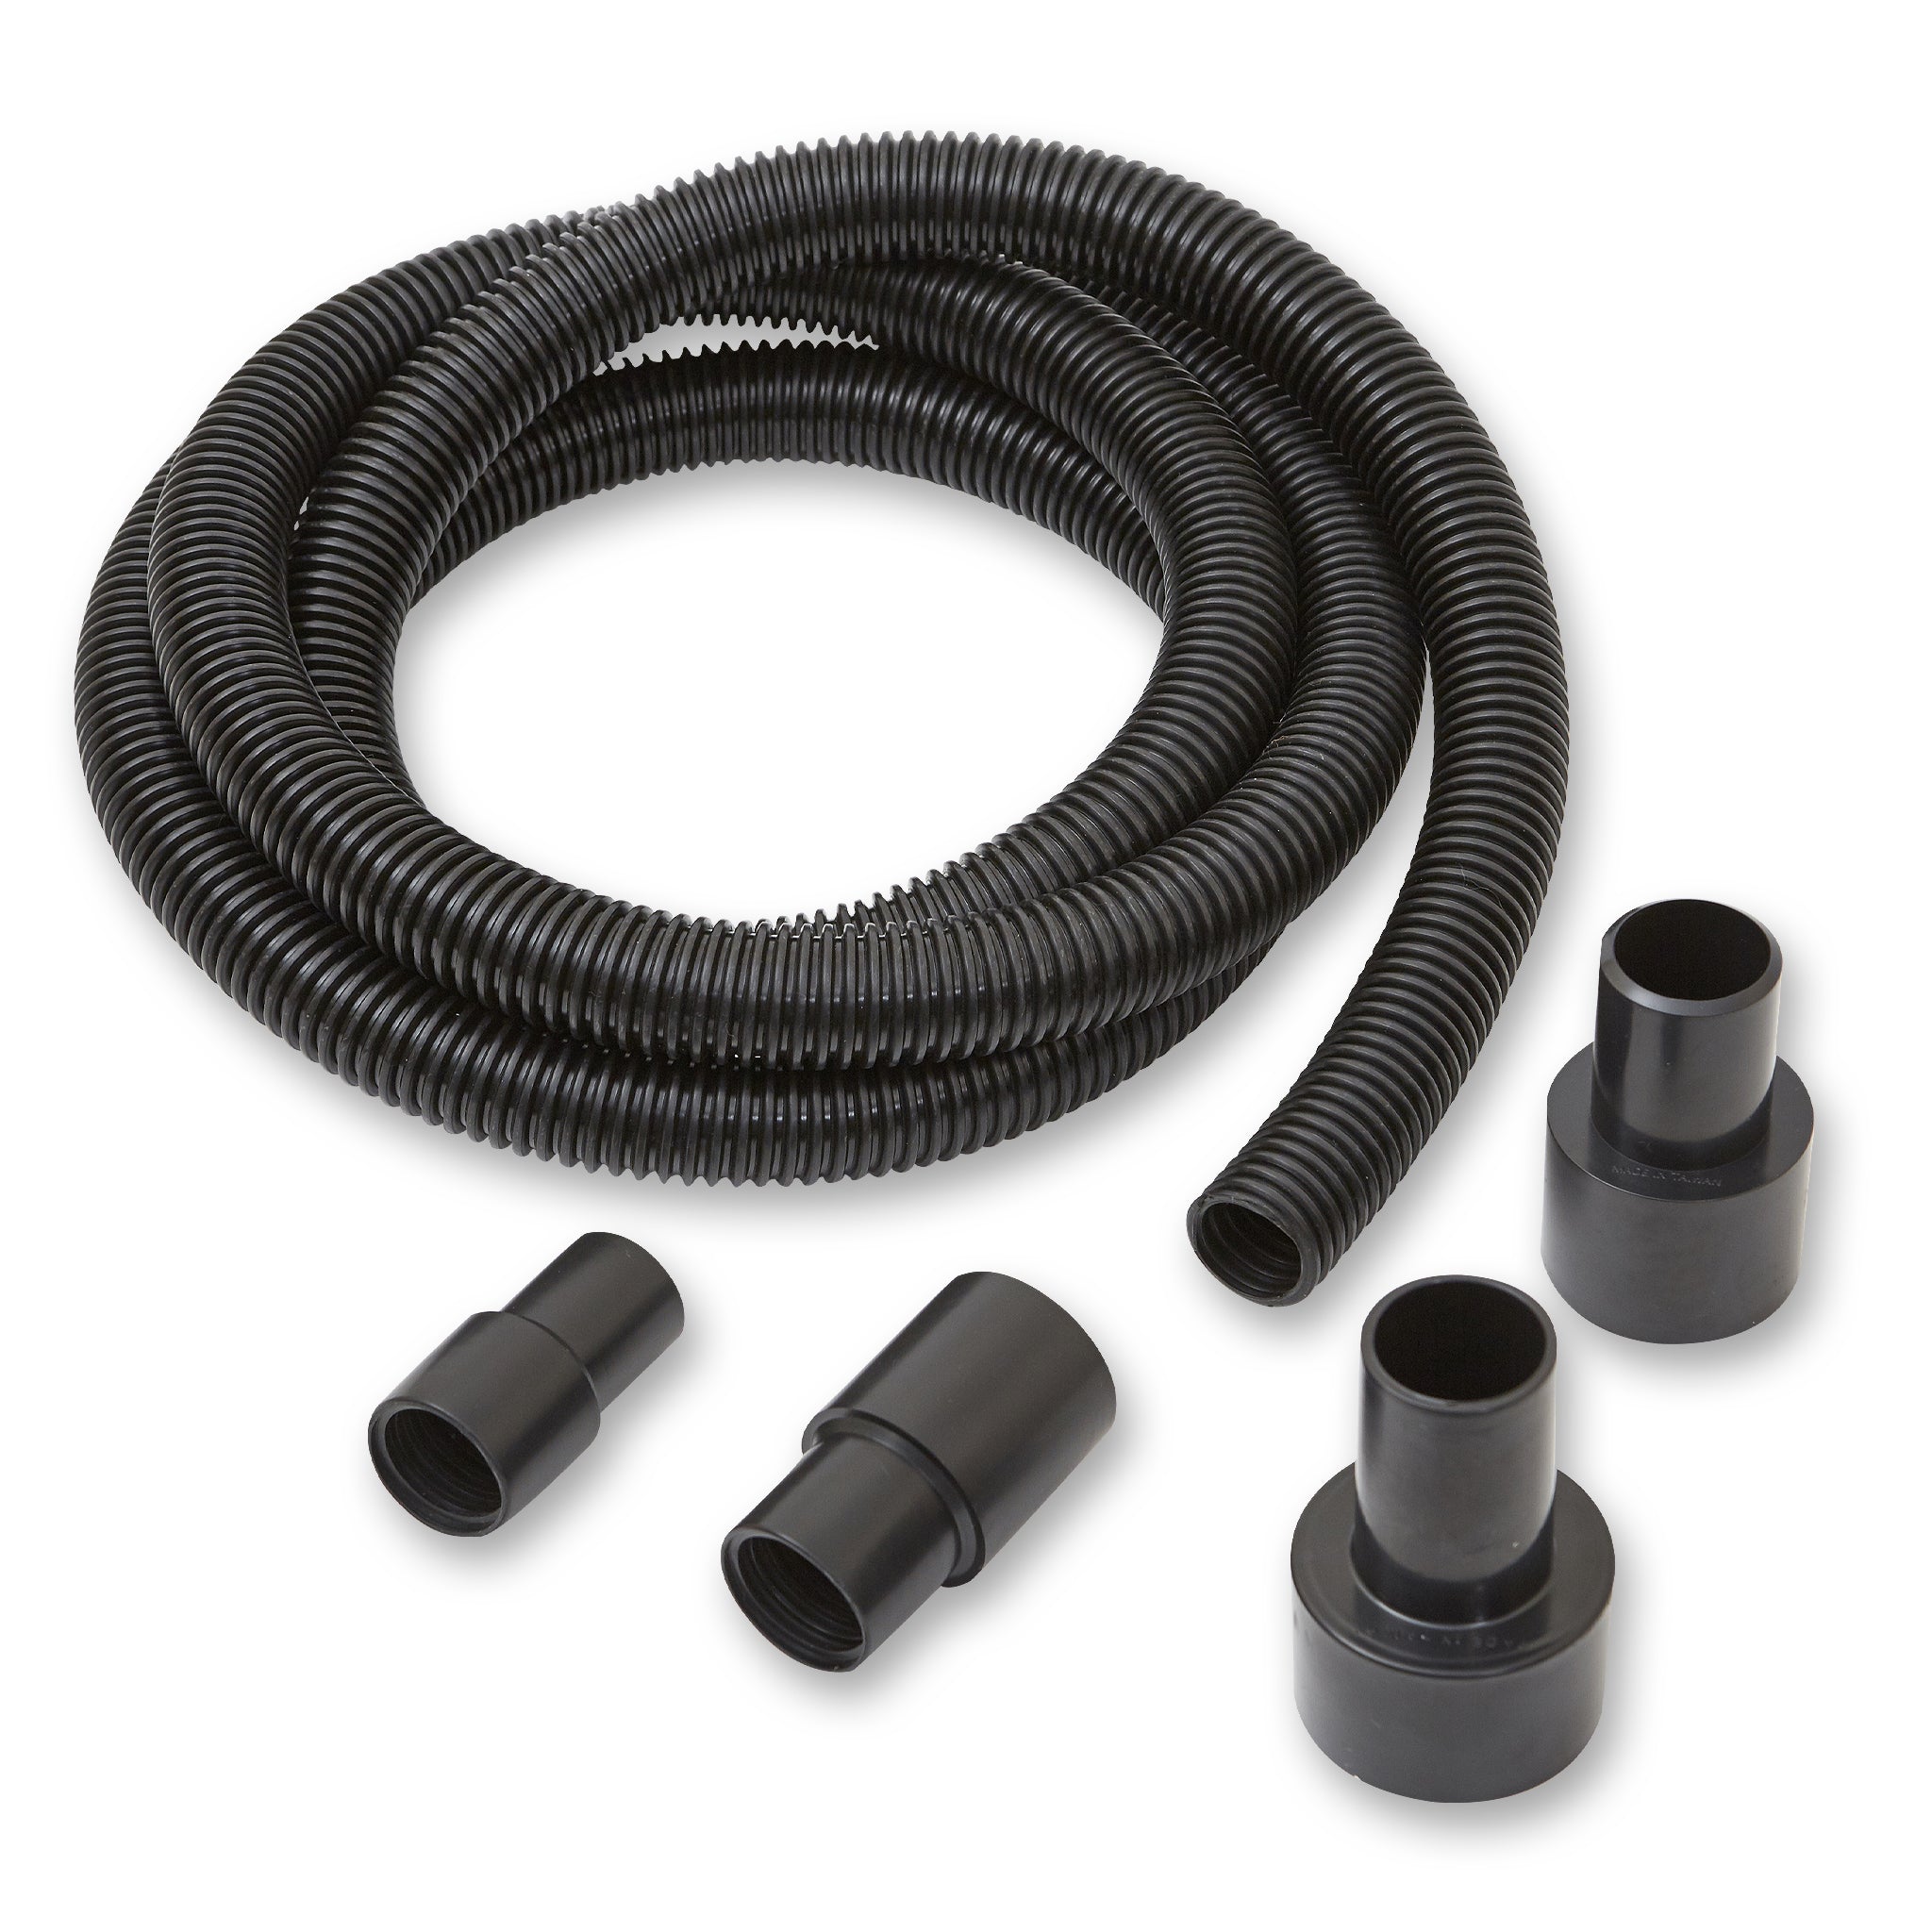 Dust Hose and Connector Kit - 32mm